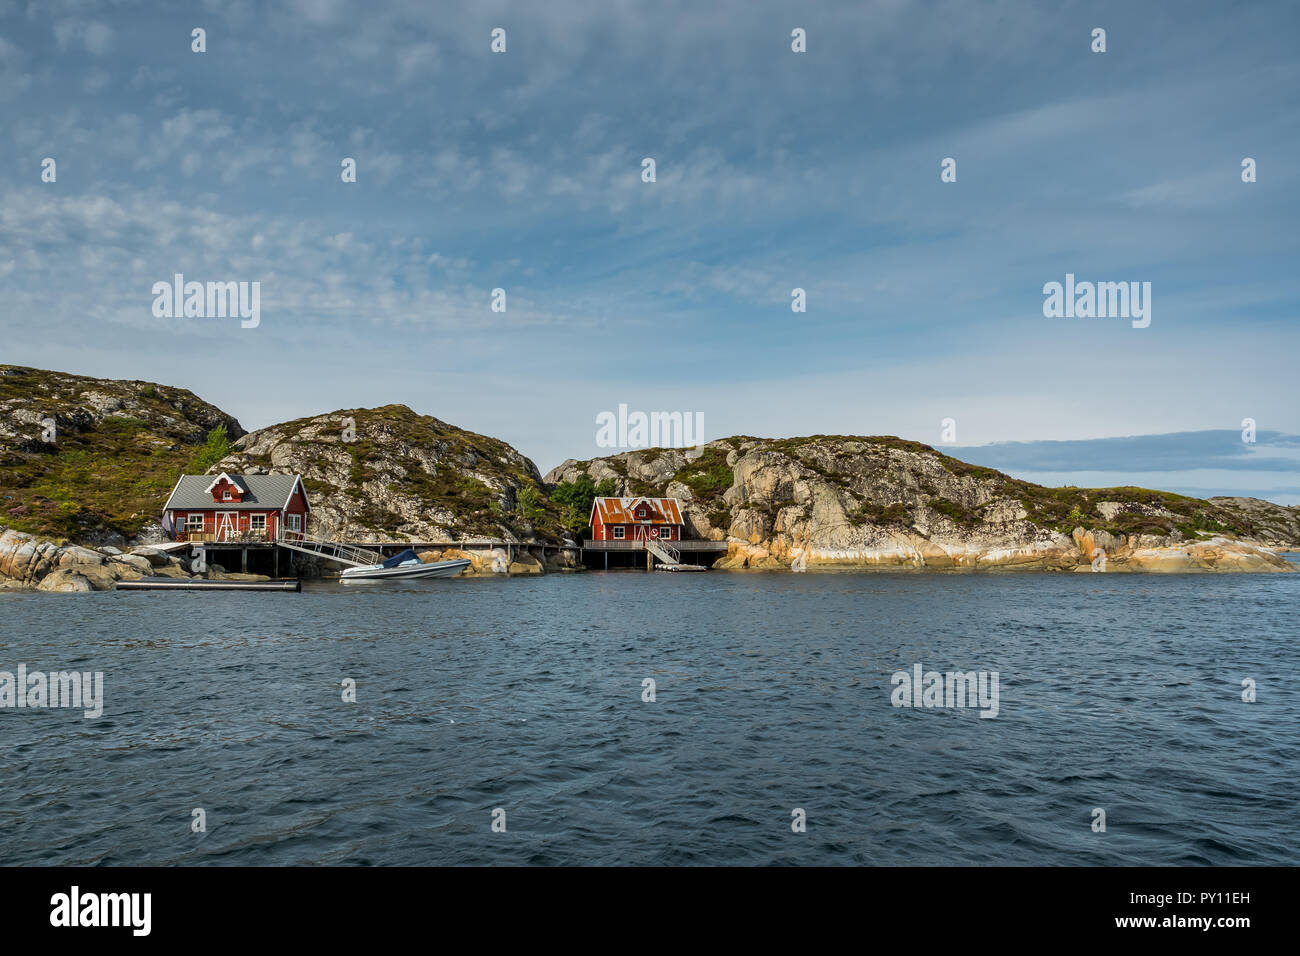 Sea fishing in Norway. Hitra August 2018 Stock Photo